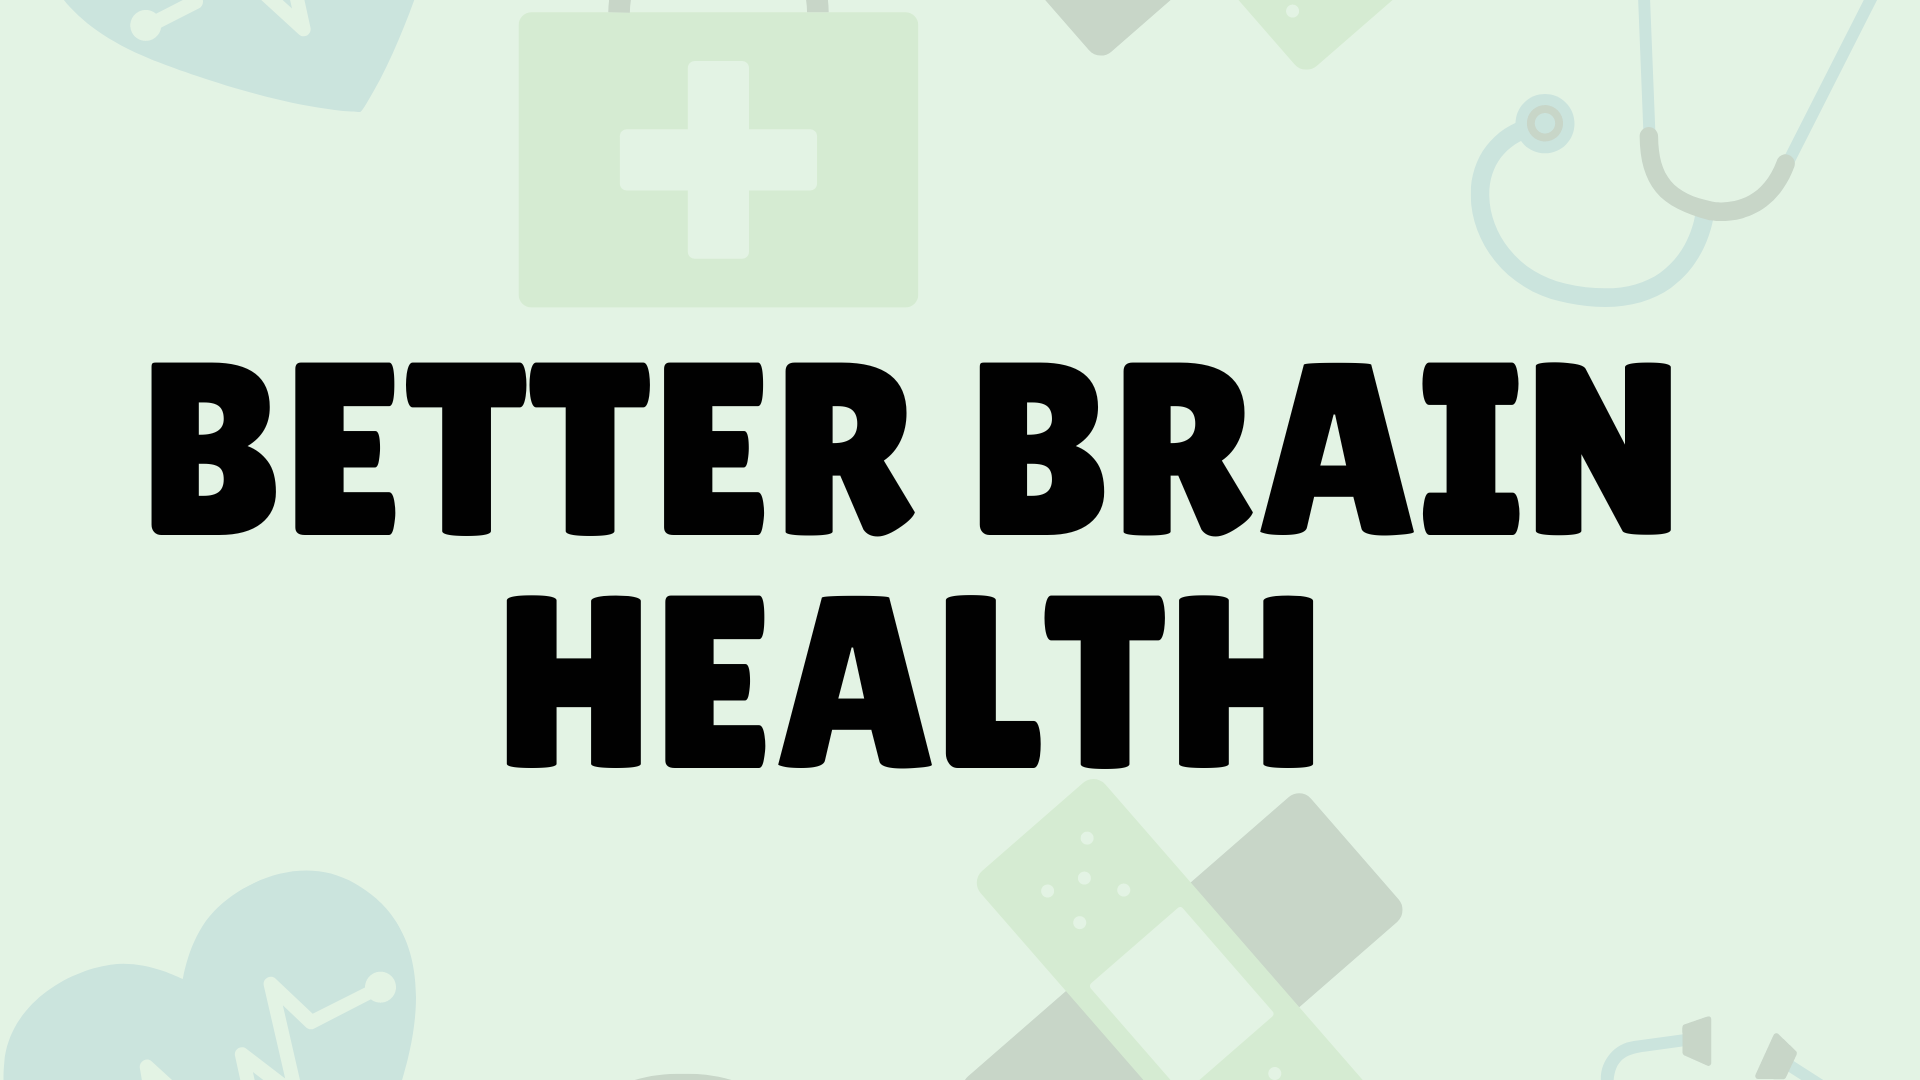 Image reads: "Better Brain Health". Set on a light green background with faint images of medical symbols, such as bandages, a cartoon heart, and doctor's supplies. 